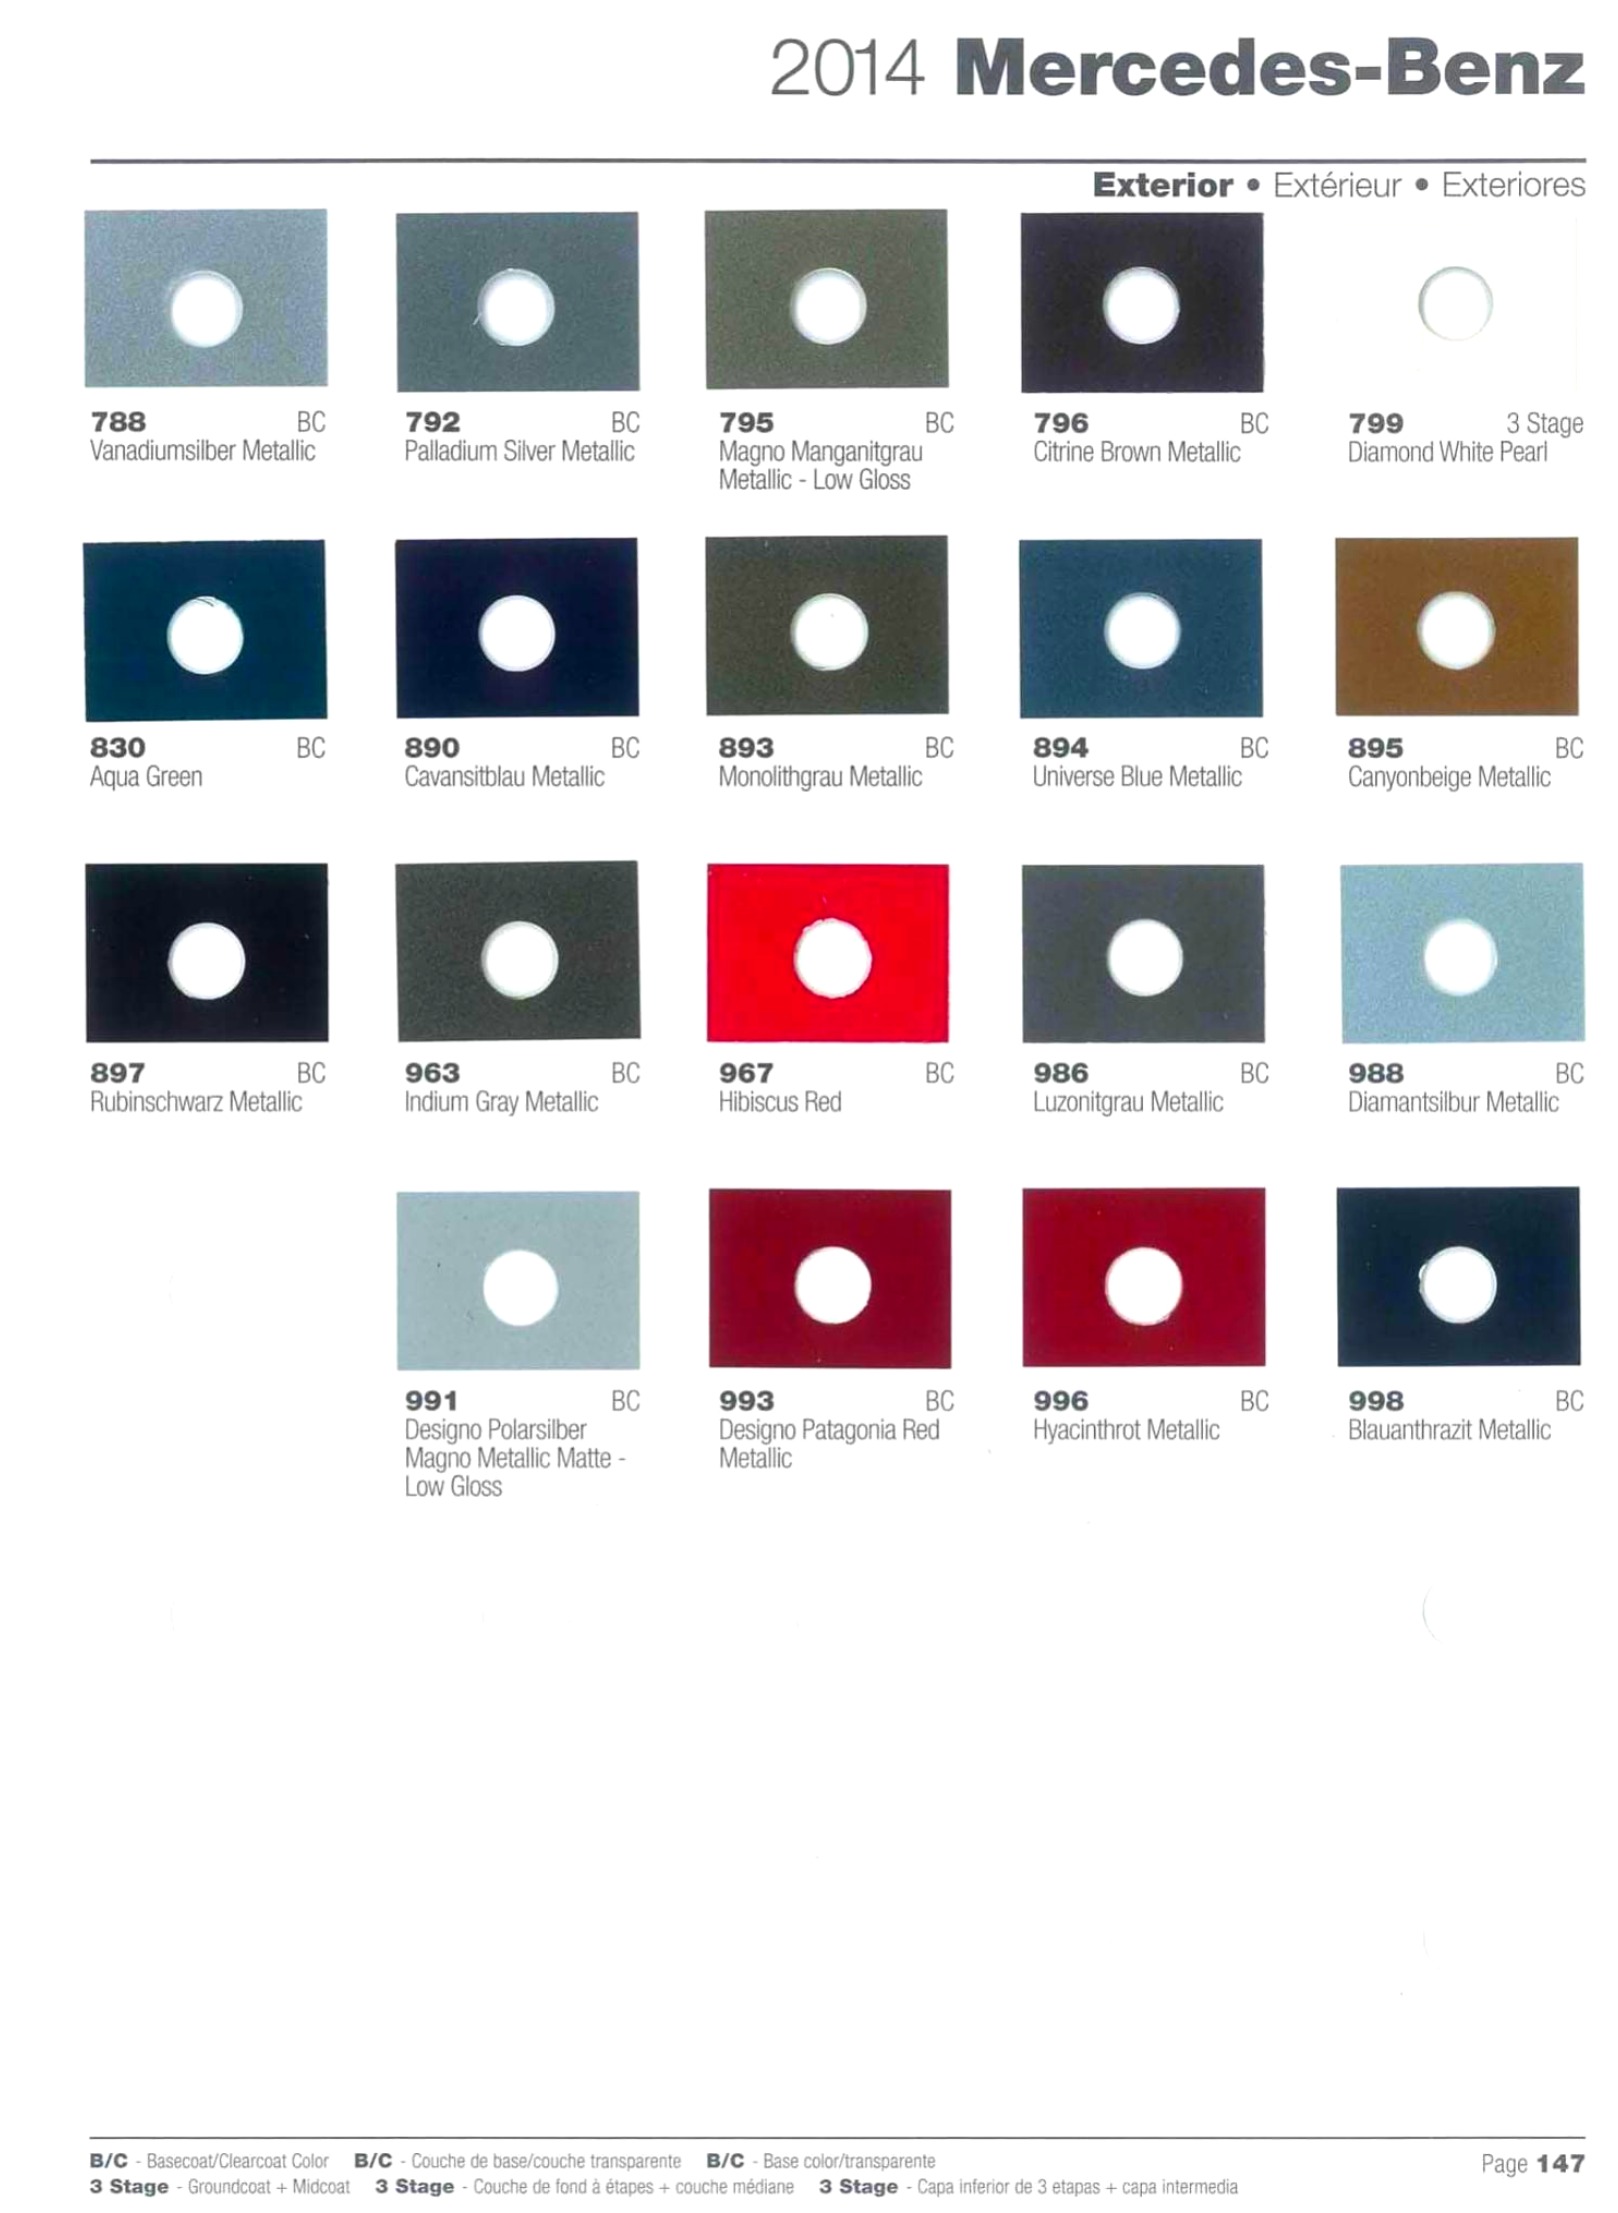 oem color codes, color names, and the paint swatches that are used on the 2014 Mercedes-Benz vehicles